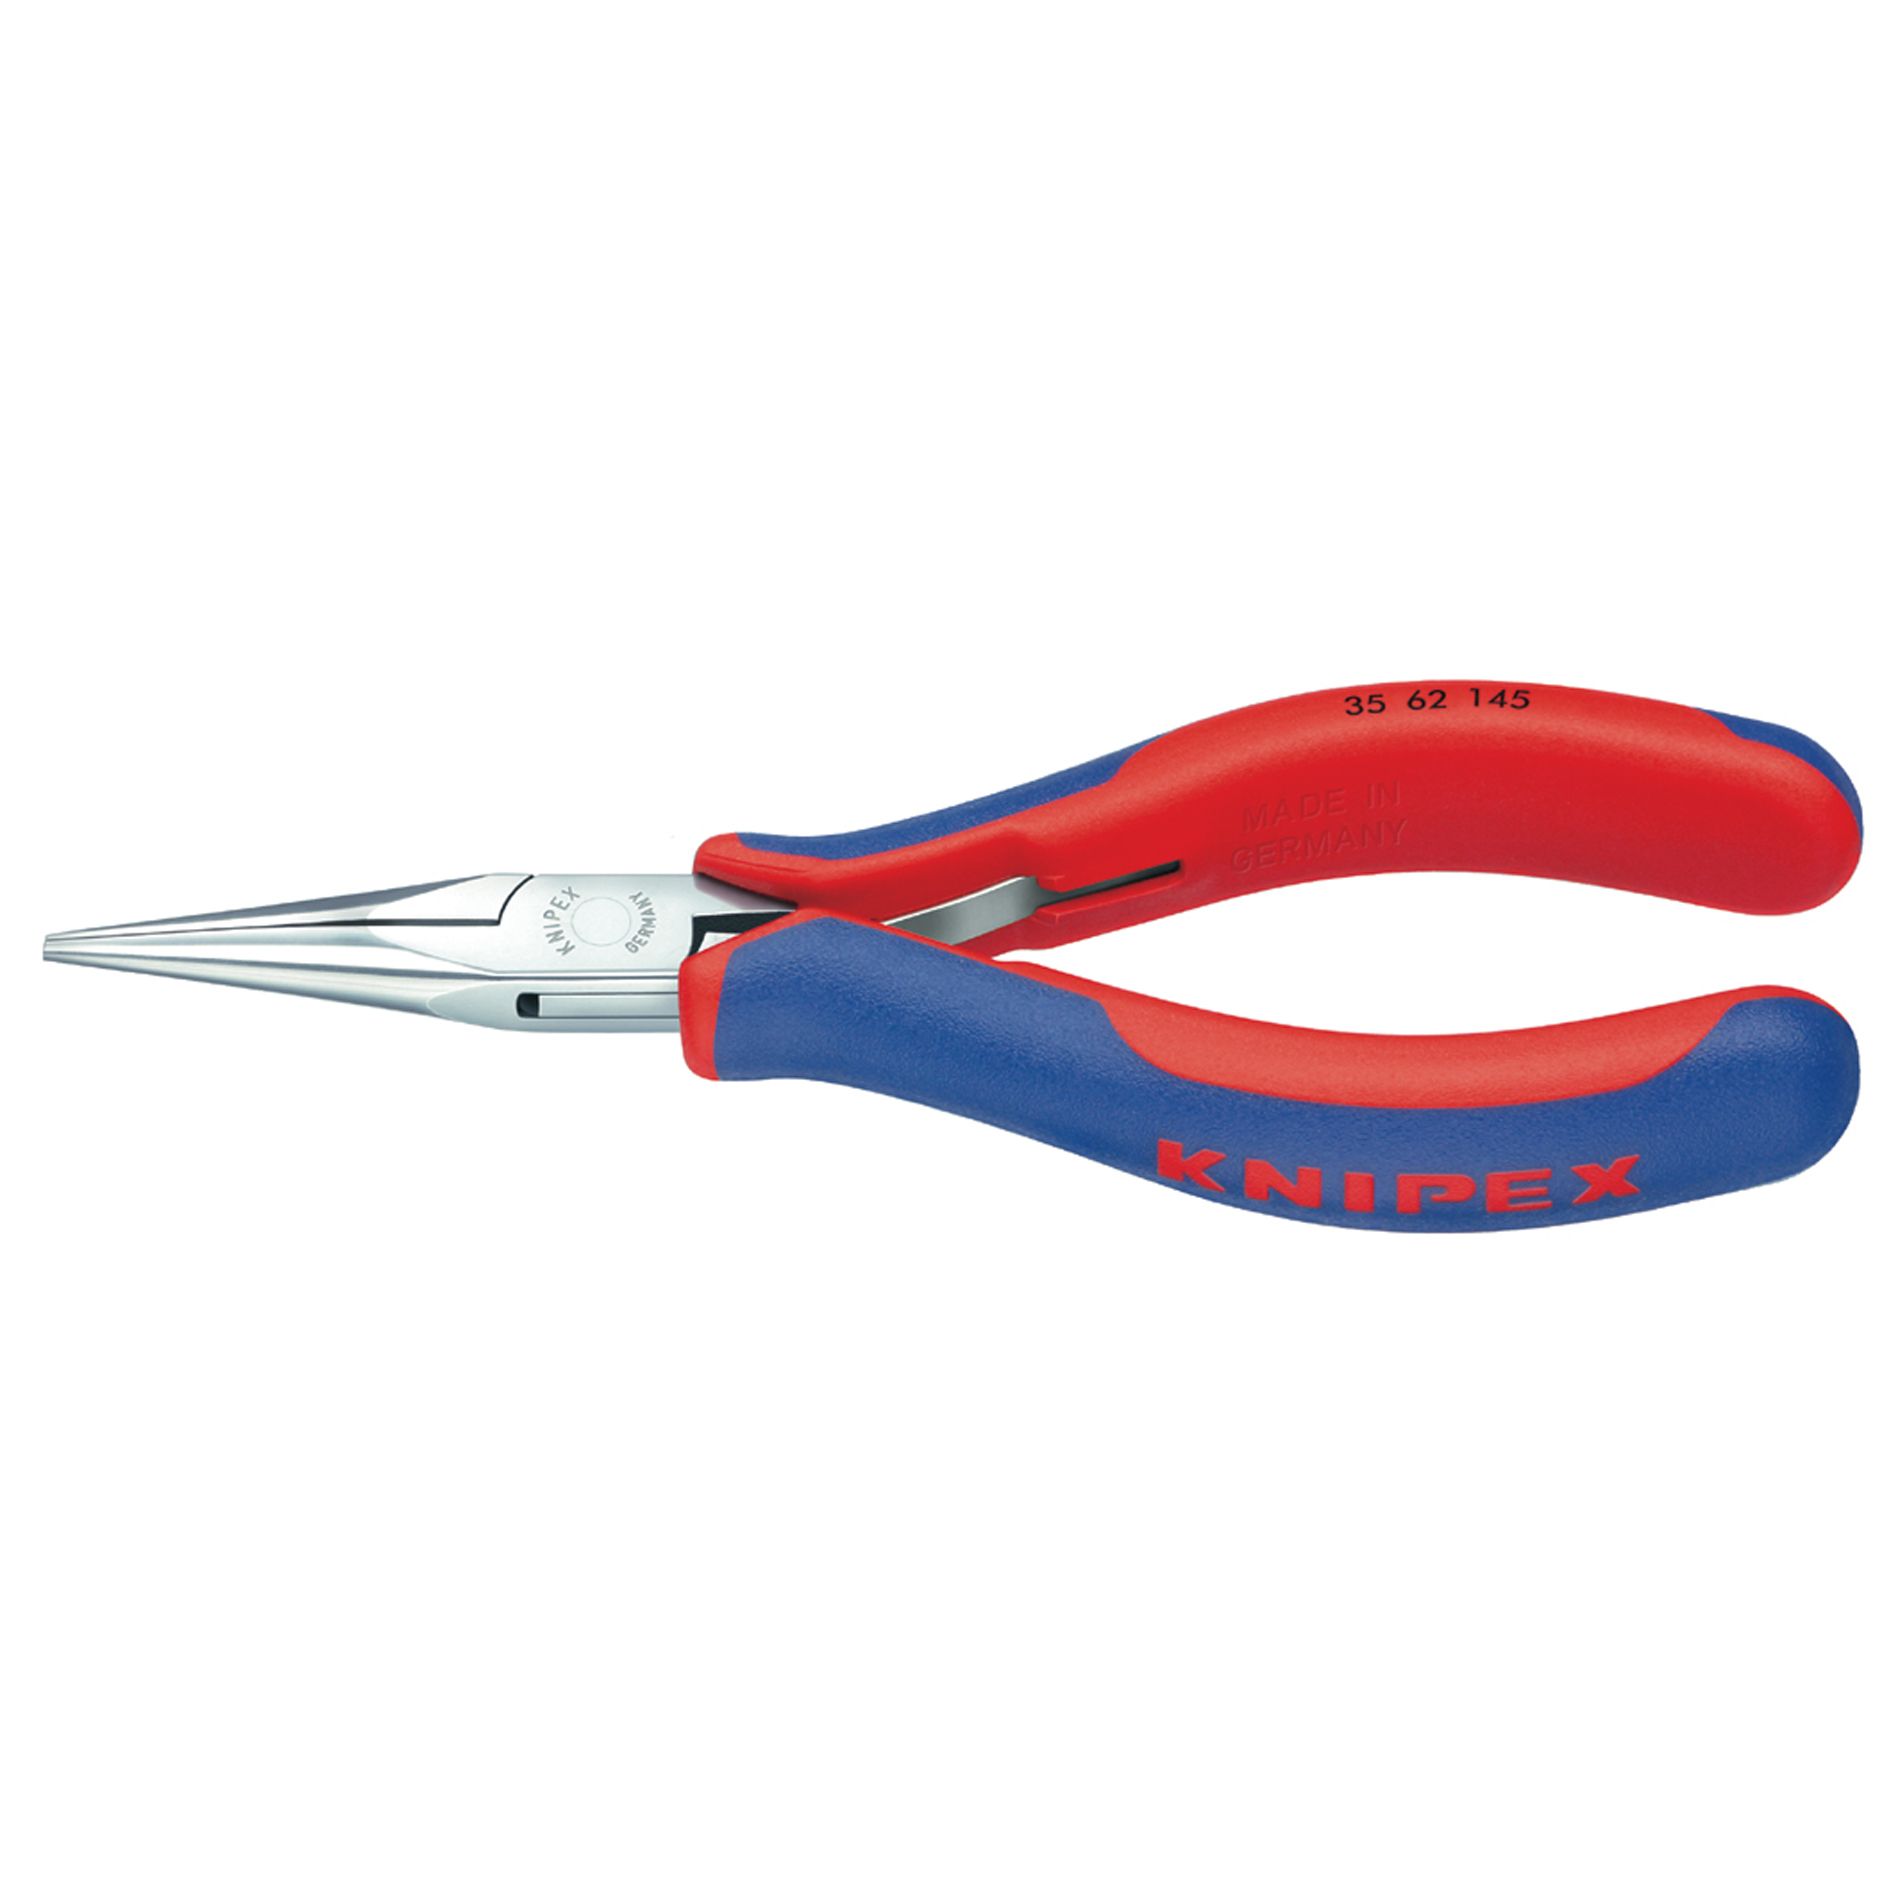 Knipex 5 3/4" Electronics Pliers - Half Round Tips